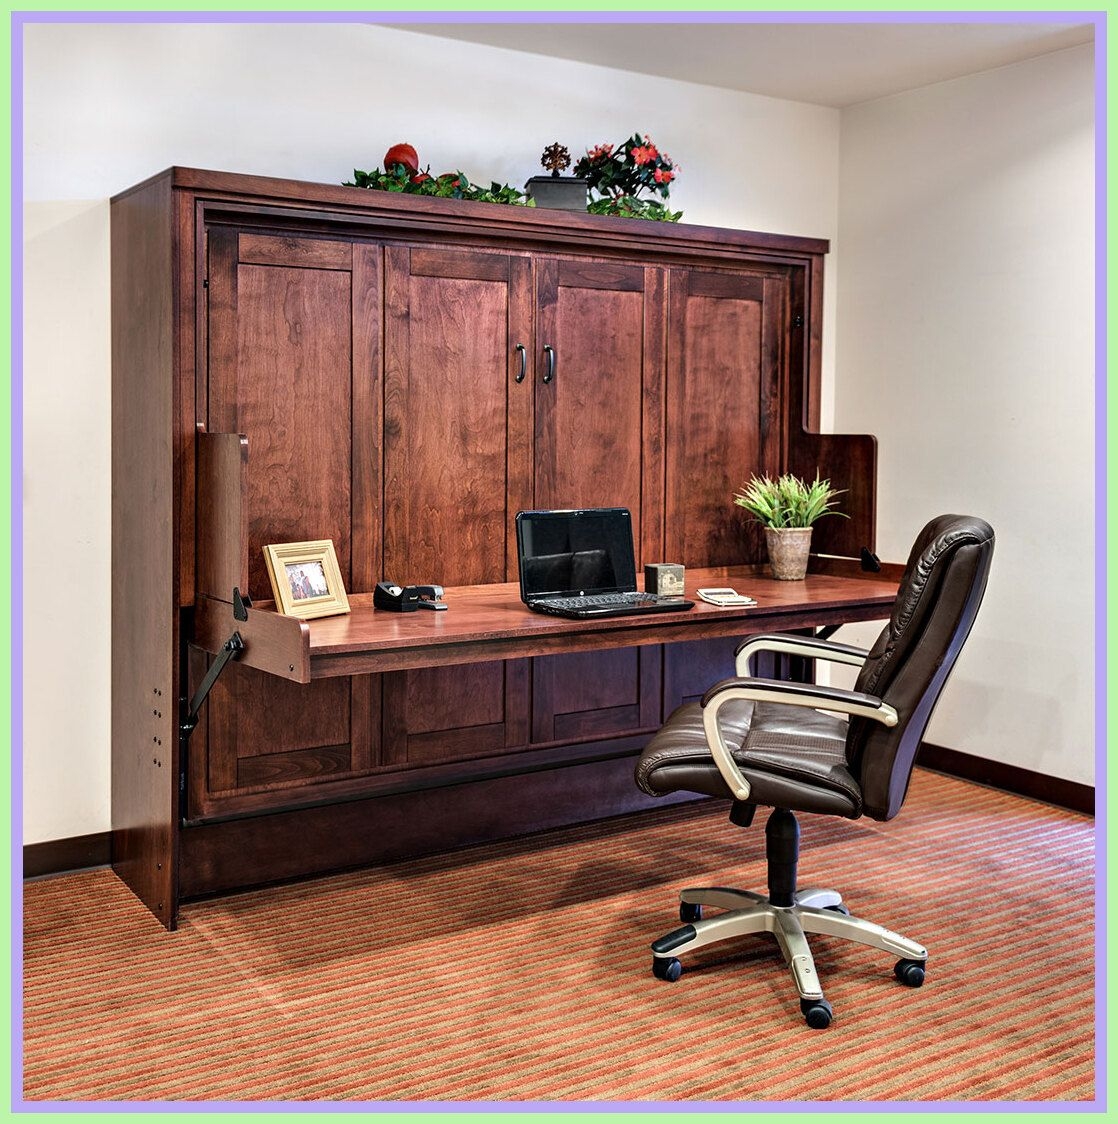 Murphy Bed With Desk Visualhunt, King Murphy Bed With Desk